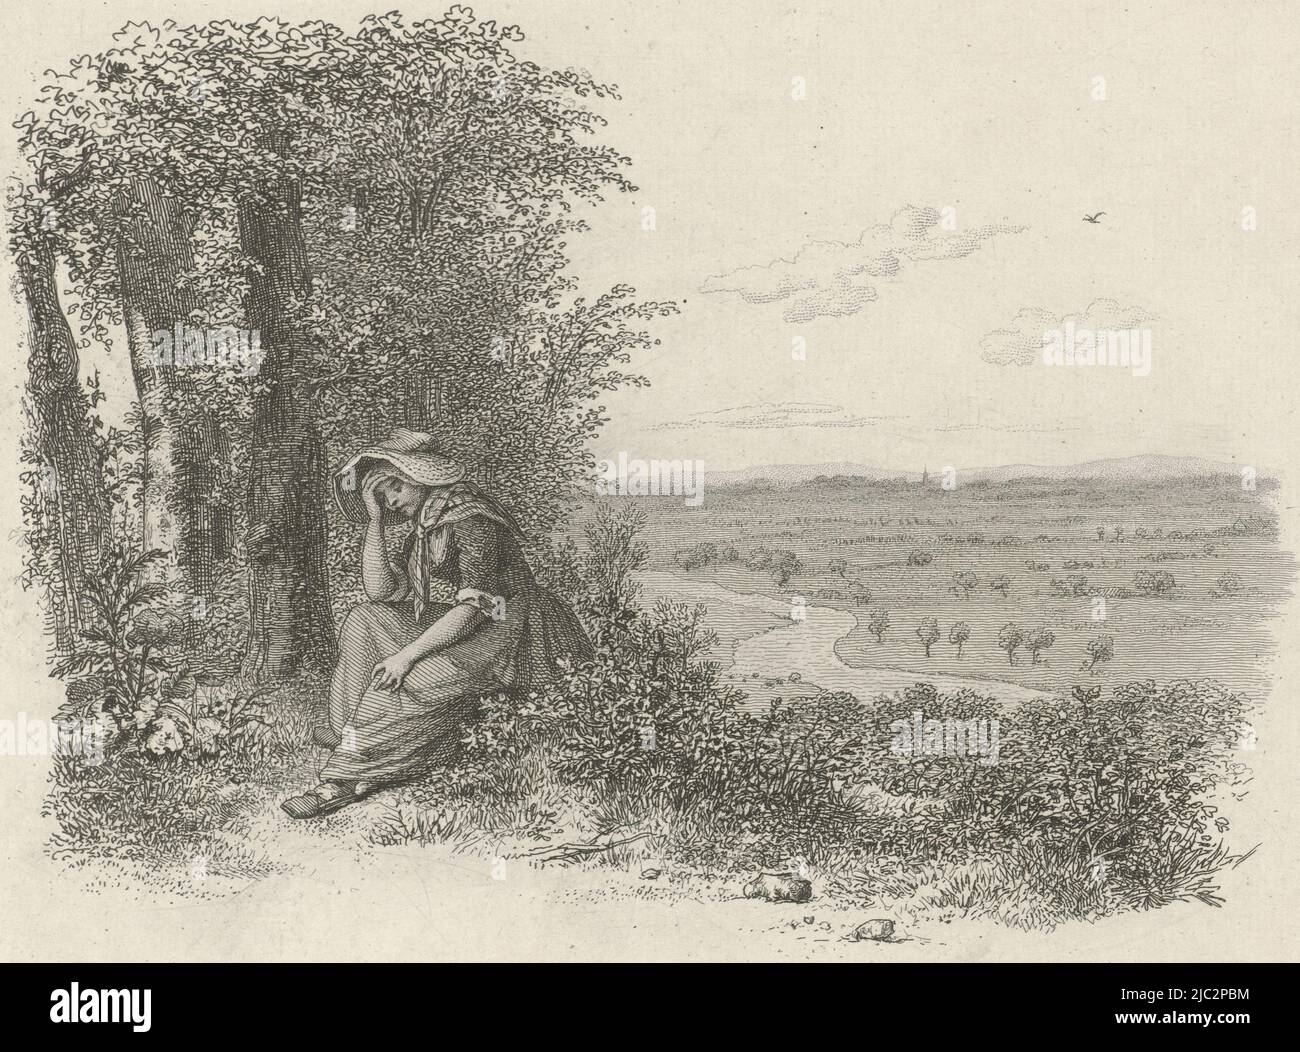 A seated woman with her head resting against her hand in a wide river landscape, Seated woman in a landscape Study printwork / Etudes grav, print maker: Jacob Ernst Marcus, Amsterdam, Nov-1814, paper, etching, h 182 mm × w 243 mm Stock Photo